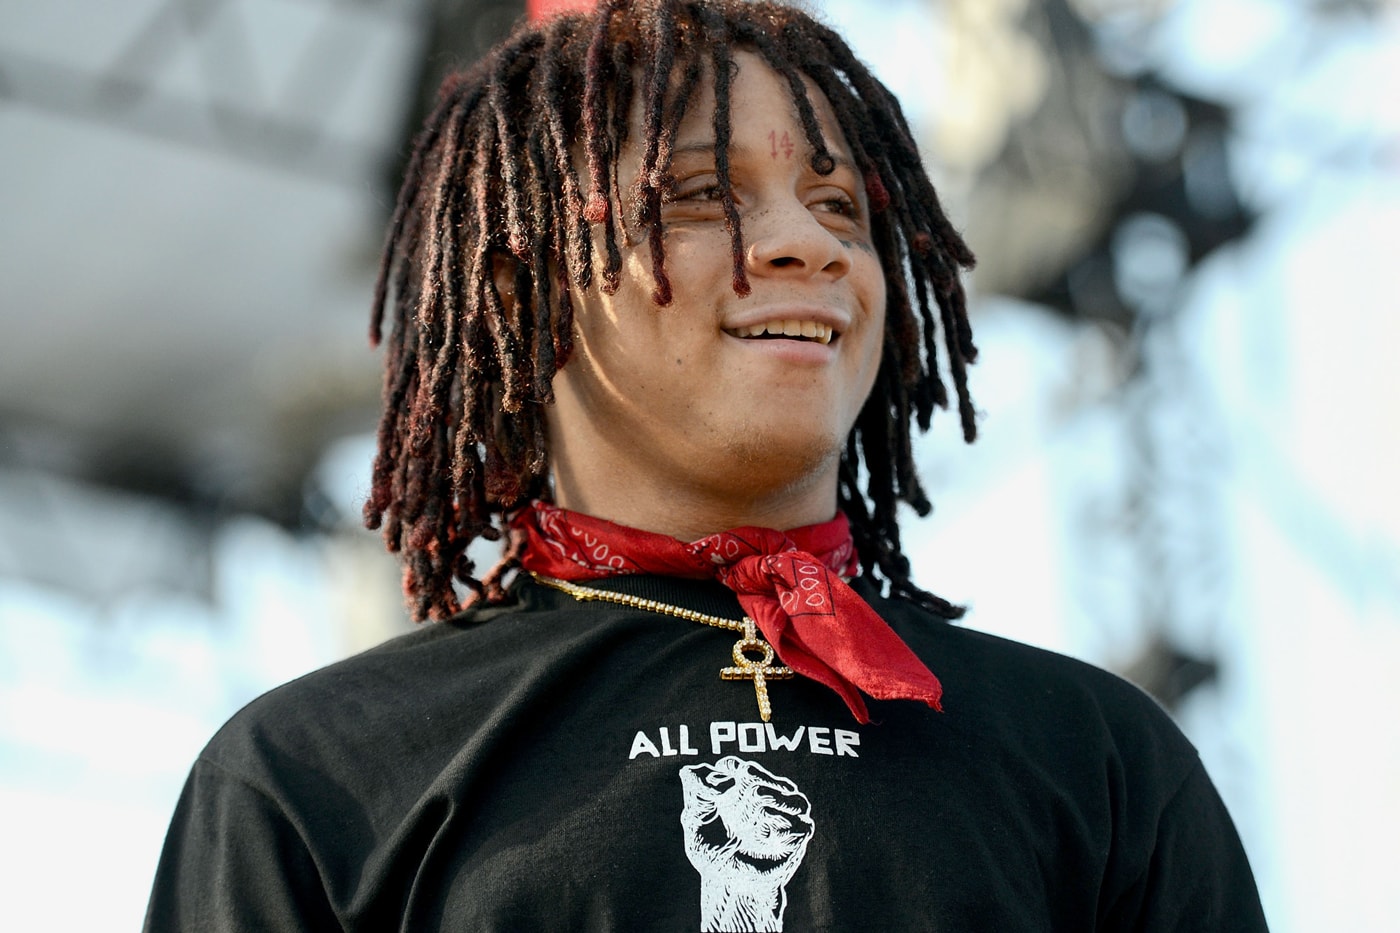 Trippie Redd A Love Letter You'll Never Get EP Download Stream Cover